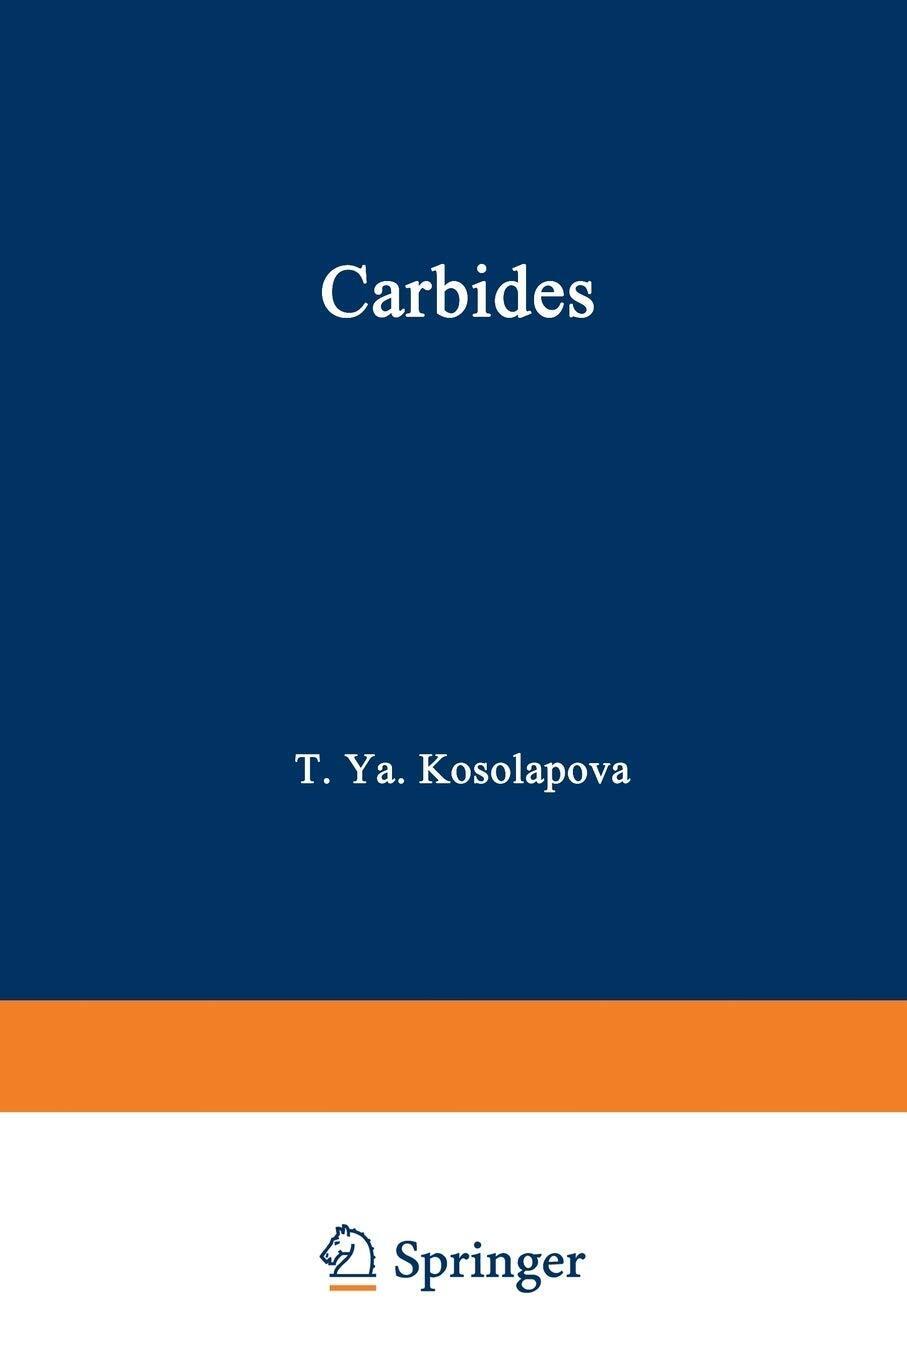 Carbides: Properties, Production, And Applications - T. Y. Kosolapova - 2013